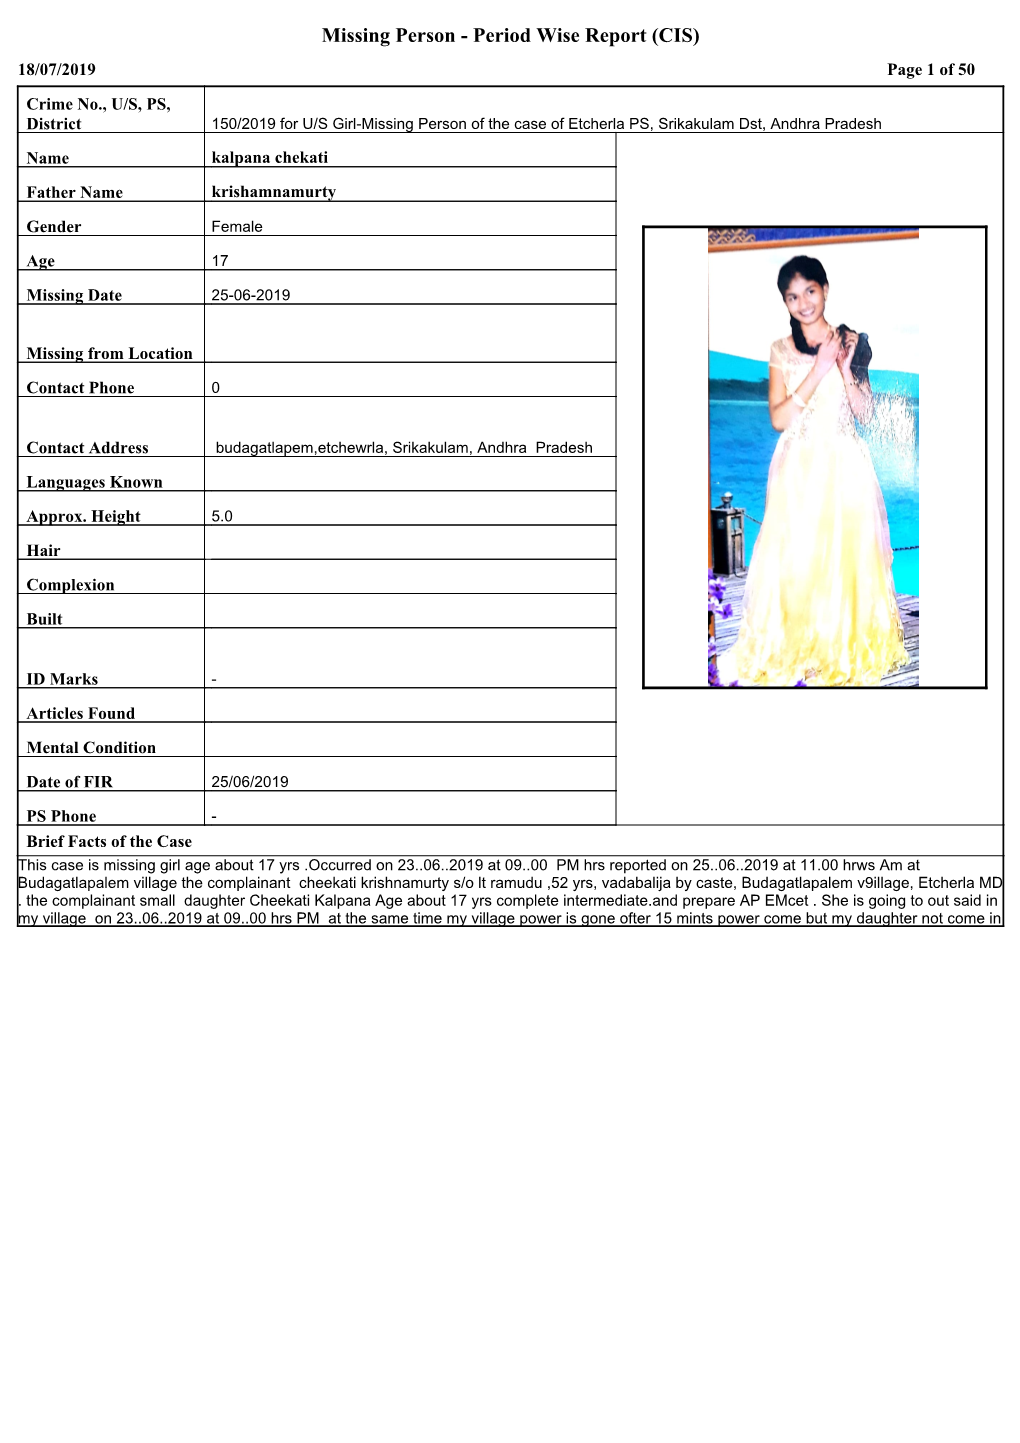 Missing Person - Period Wise Report (CIS) 18/07/2019 Page 1 of 50